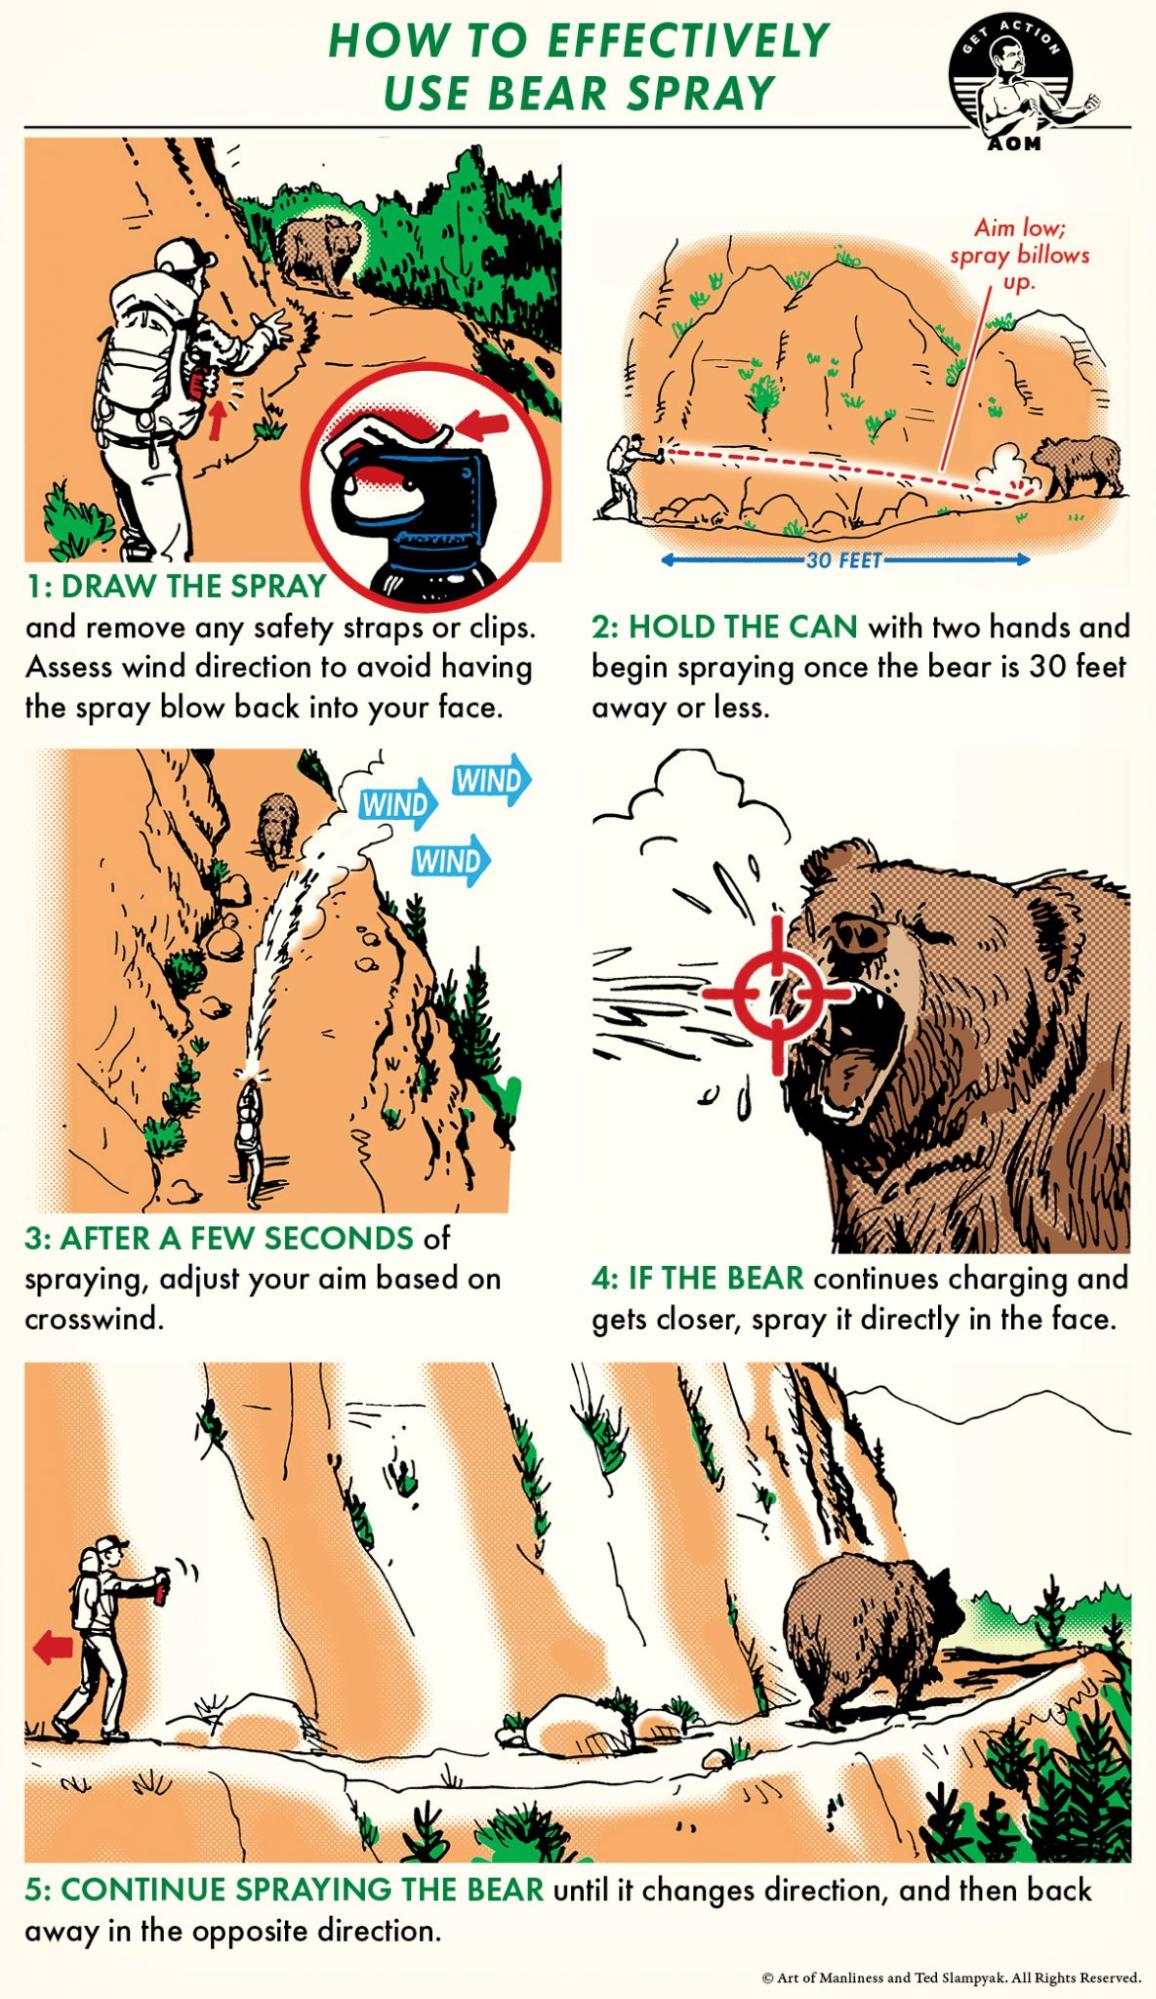 An infographic from the Art of Manliness website describing how to use bear spray. Picture courtesy- Art of Manliness